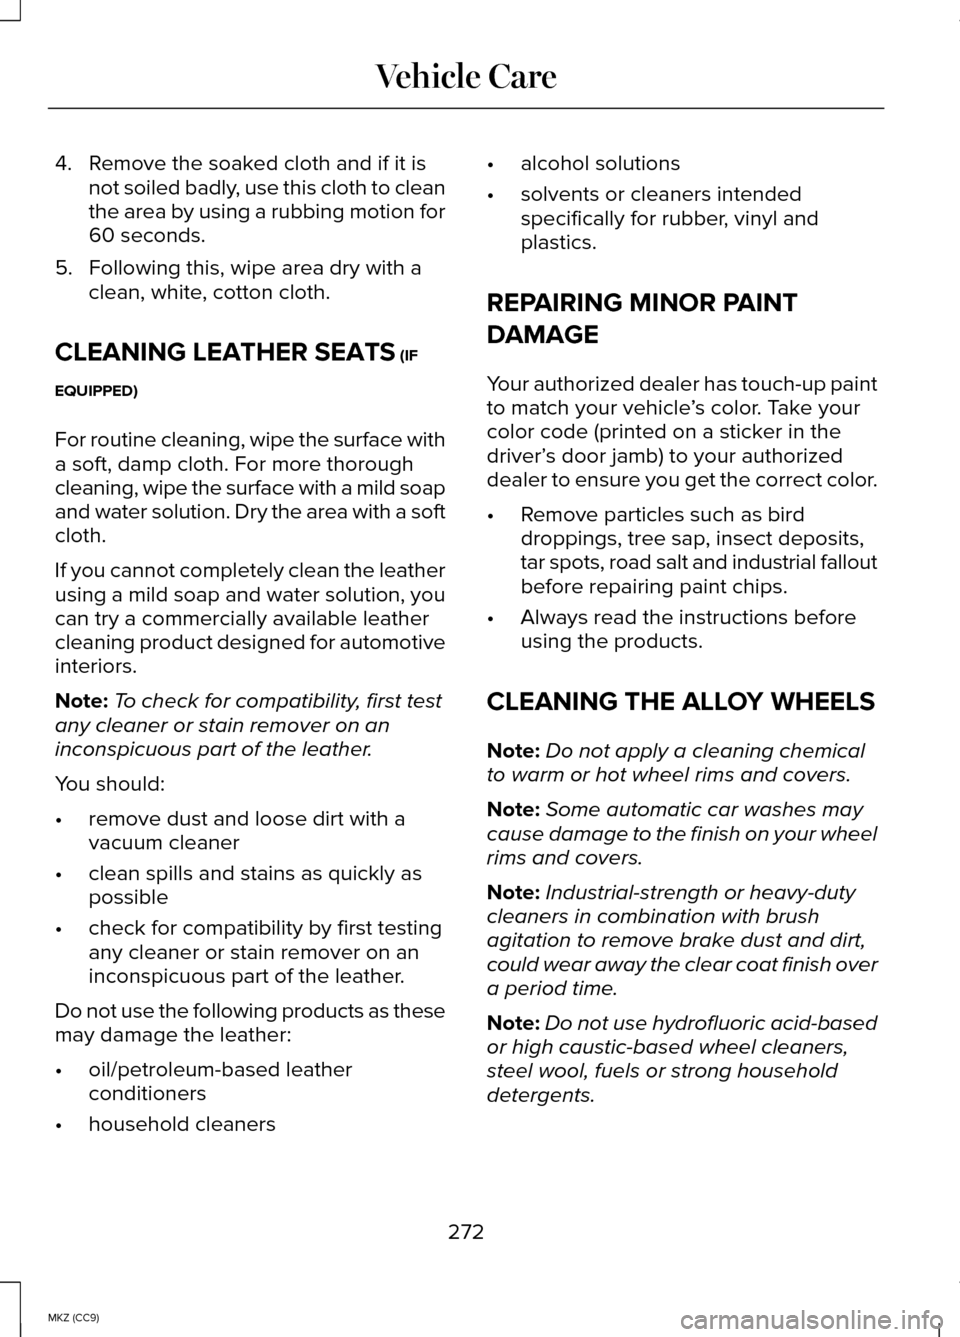 LINCOLN MKZ HYBRID 2014  Owners Manual 4. Remove the soaked cloth and if it is
not soiled badly, use this cloth to clean
the area by using a rubbing motion for
60 seconds.
5. Following this, wipe area dry with a clean, white, cotton cloth.